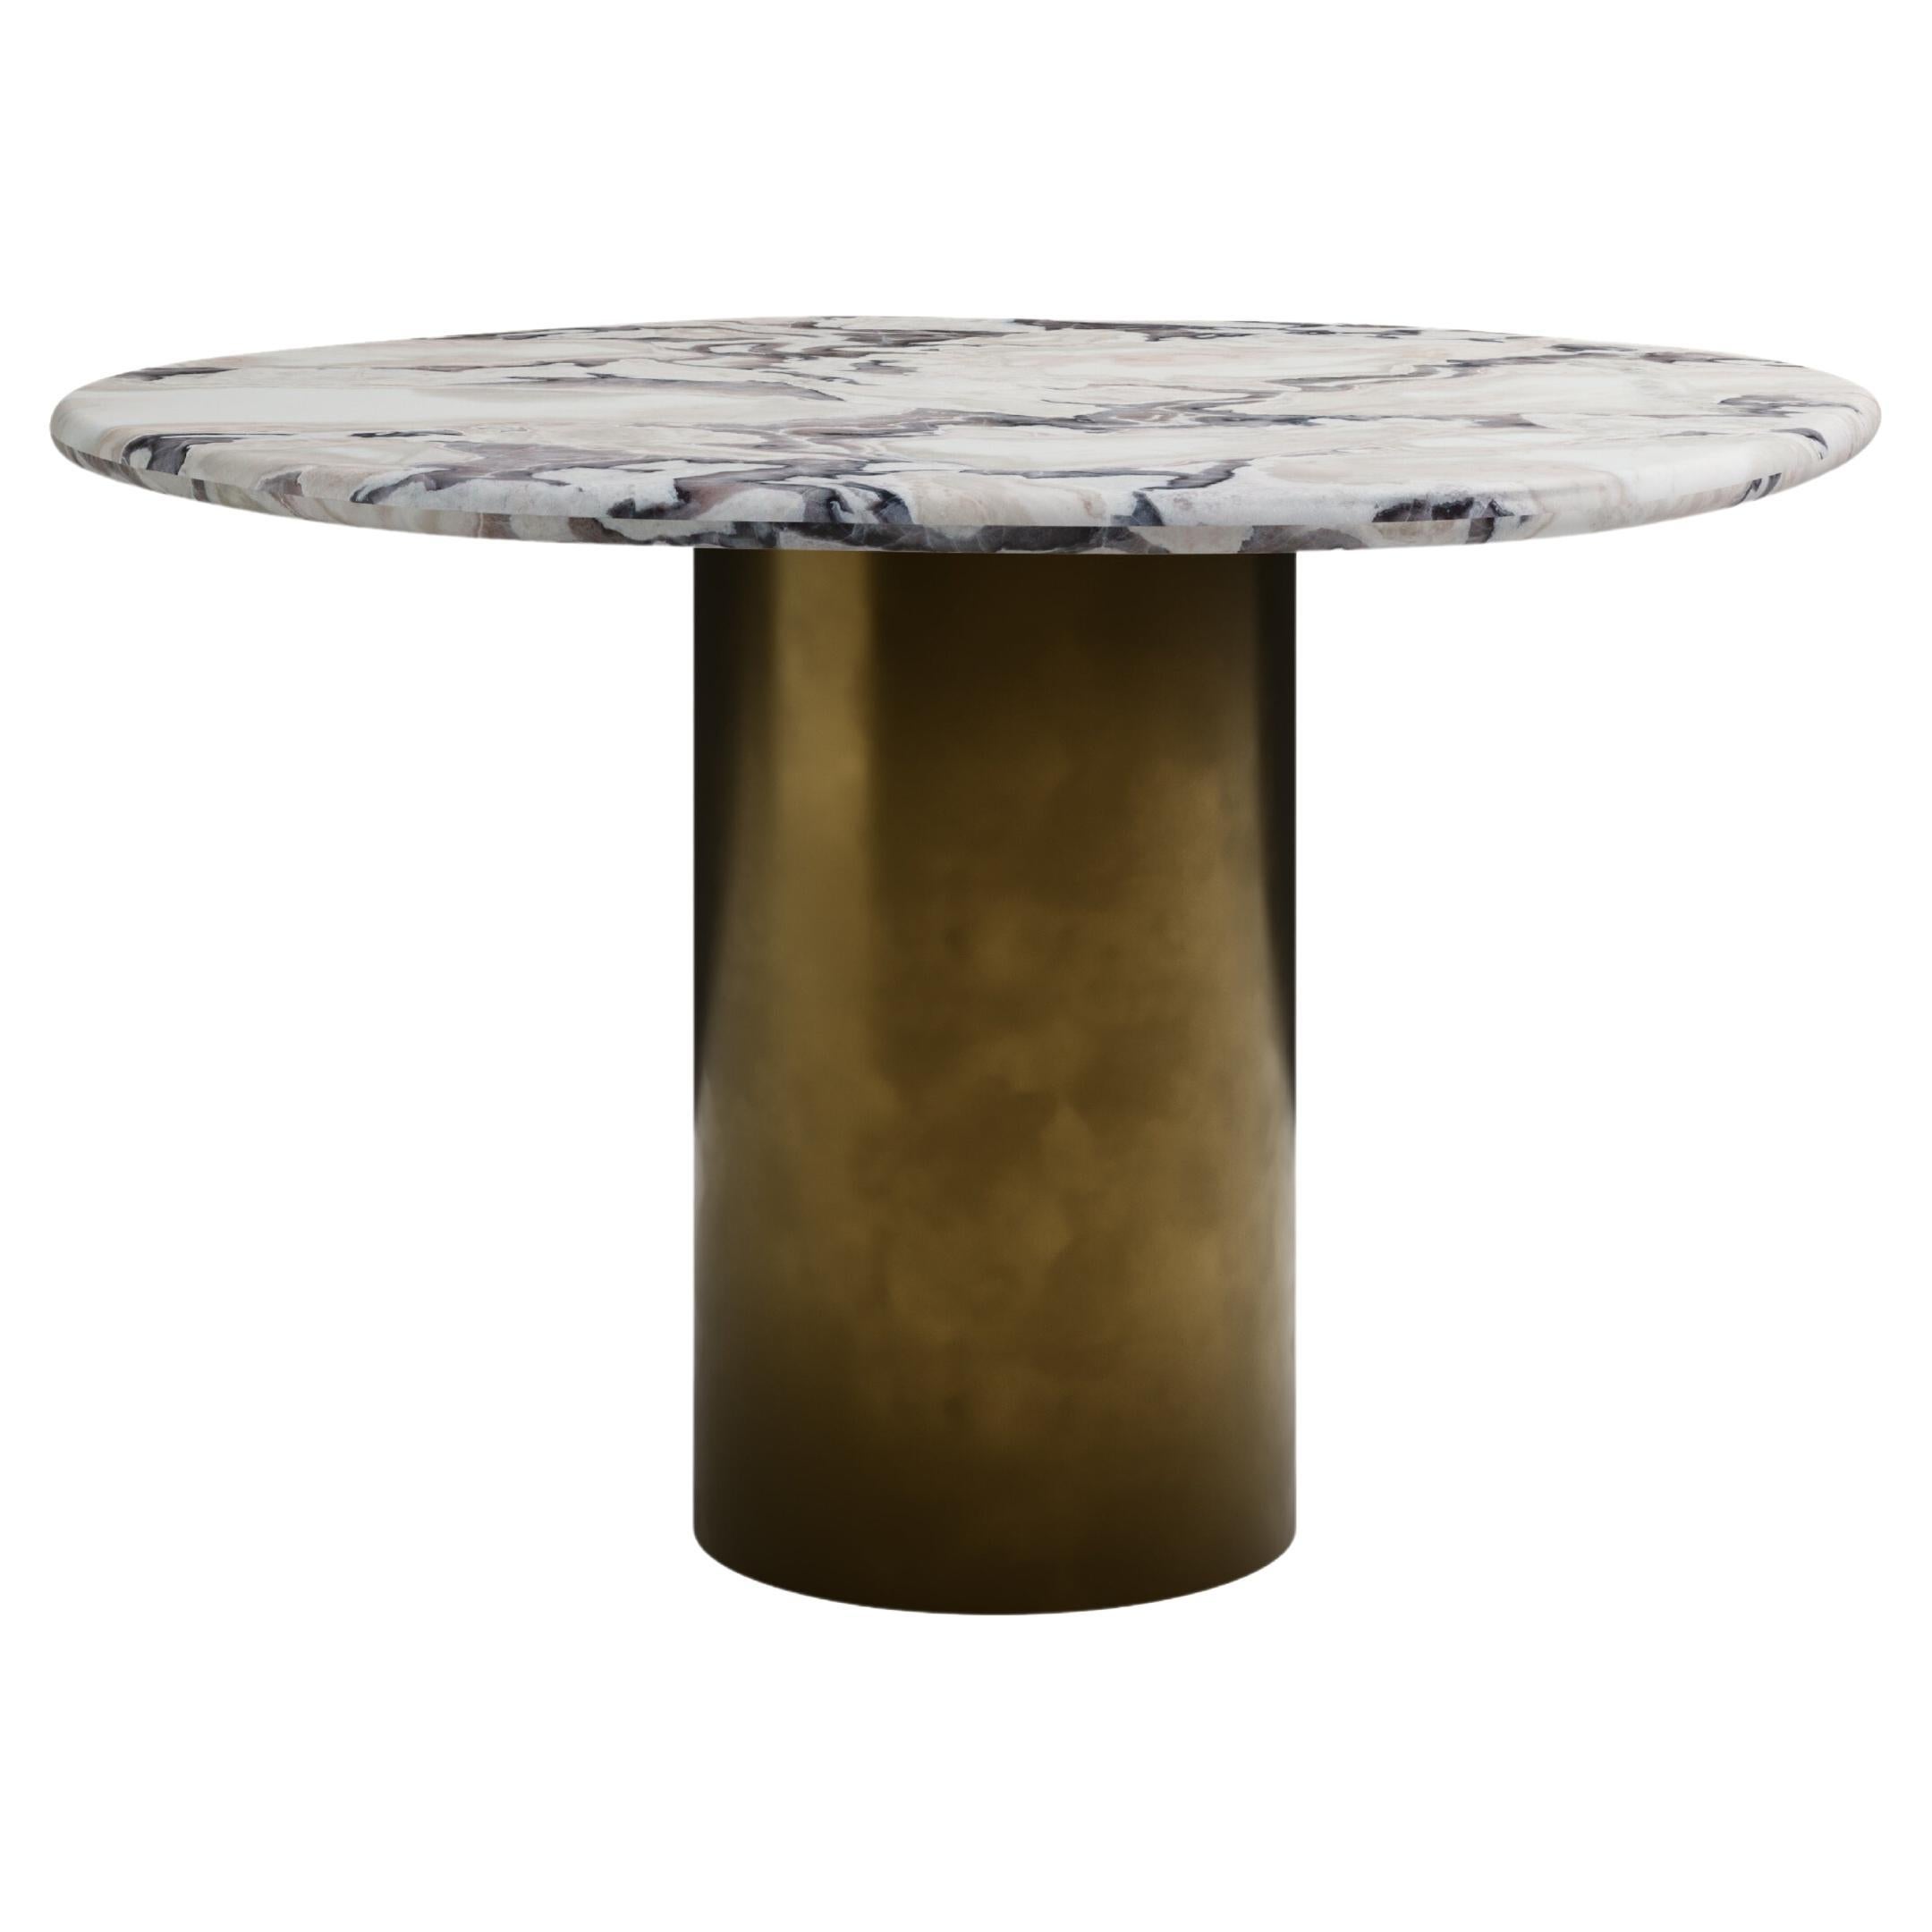 FORM(LA) Lago Round Dining Table 48”L x 48”W x 30”H Oyster Marble & Bronze For Sale